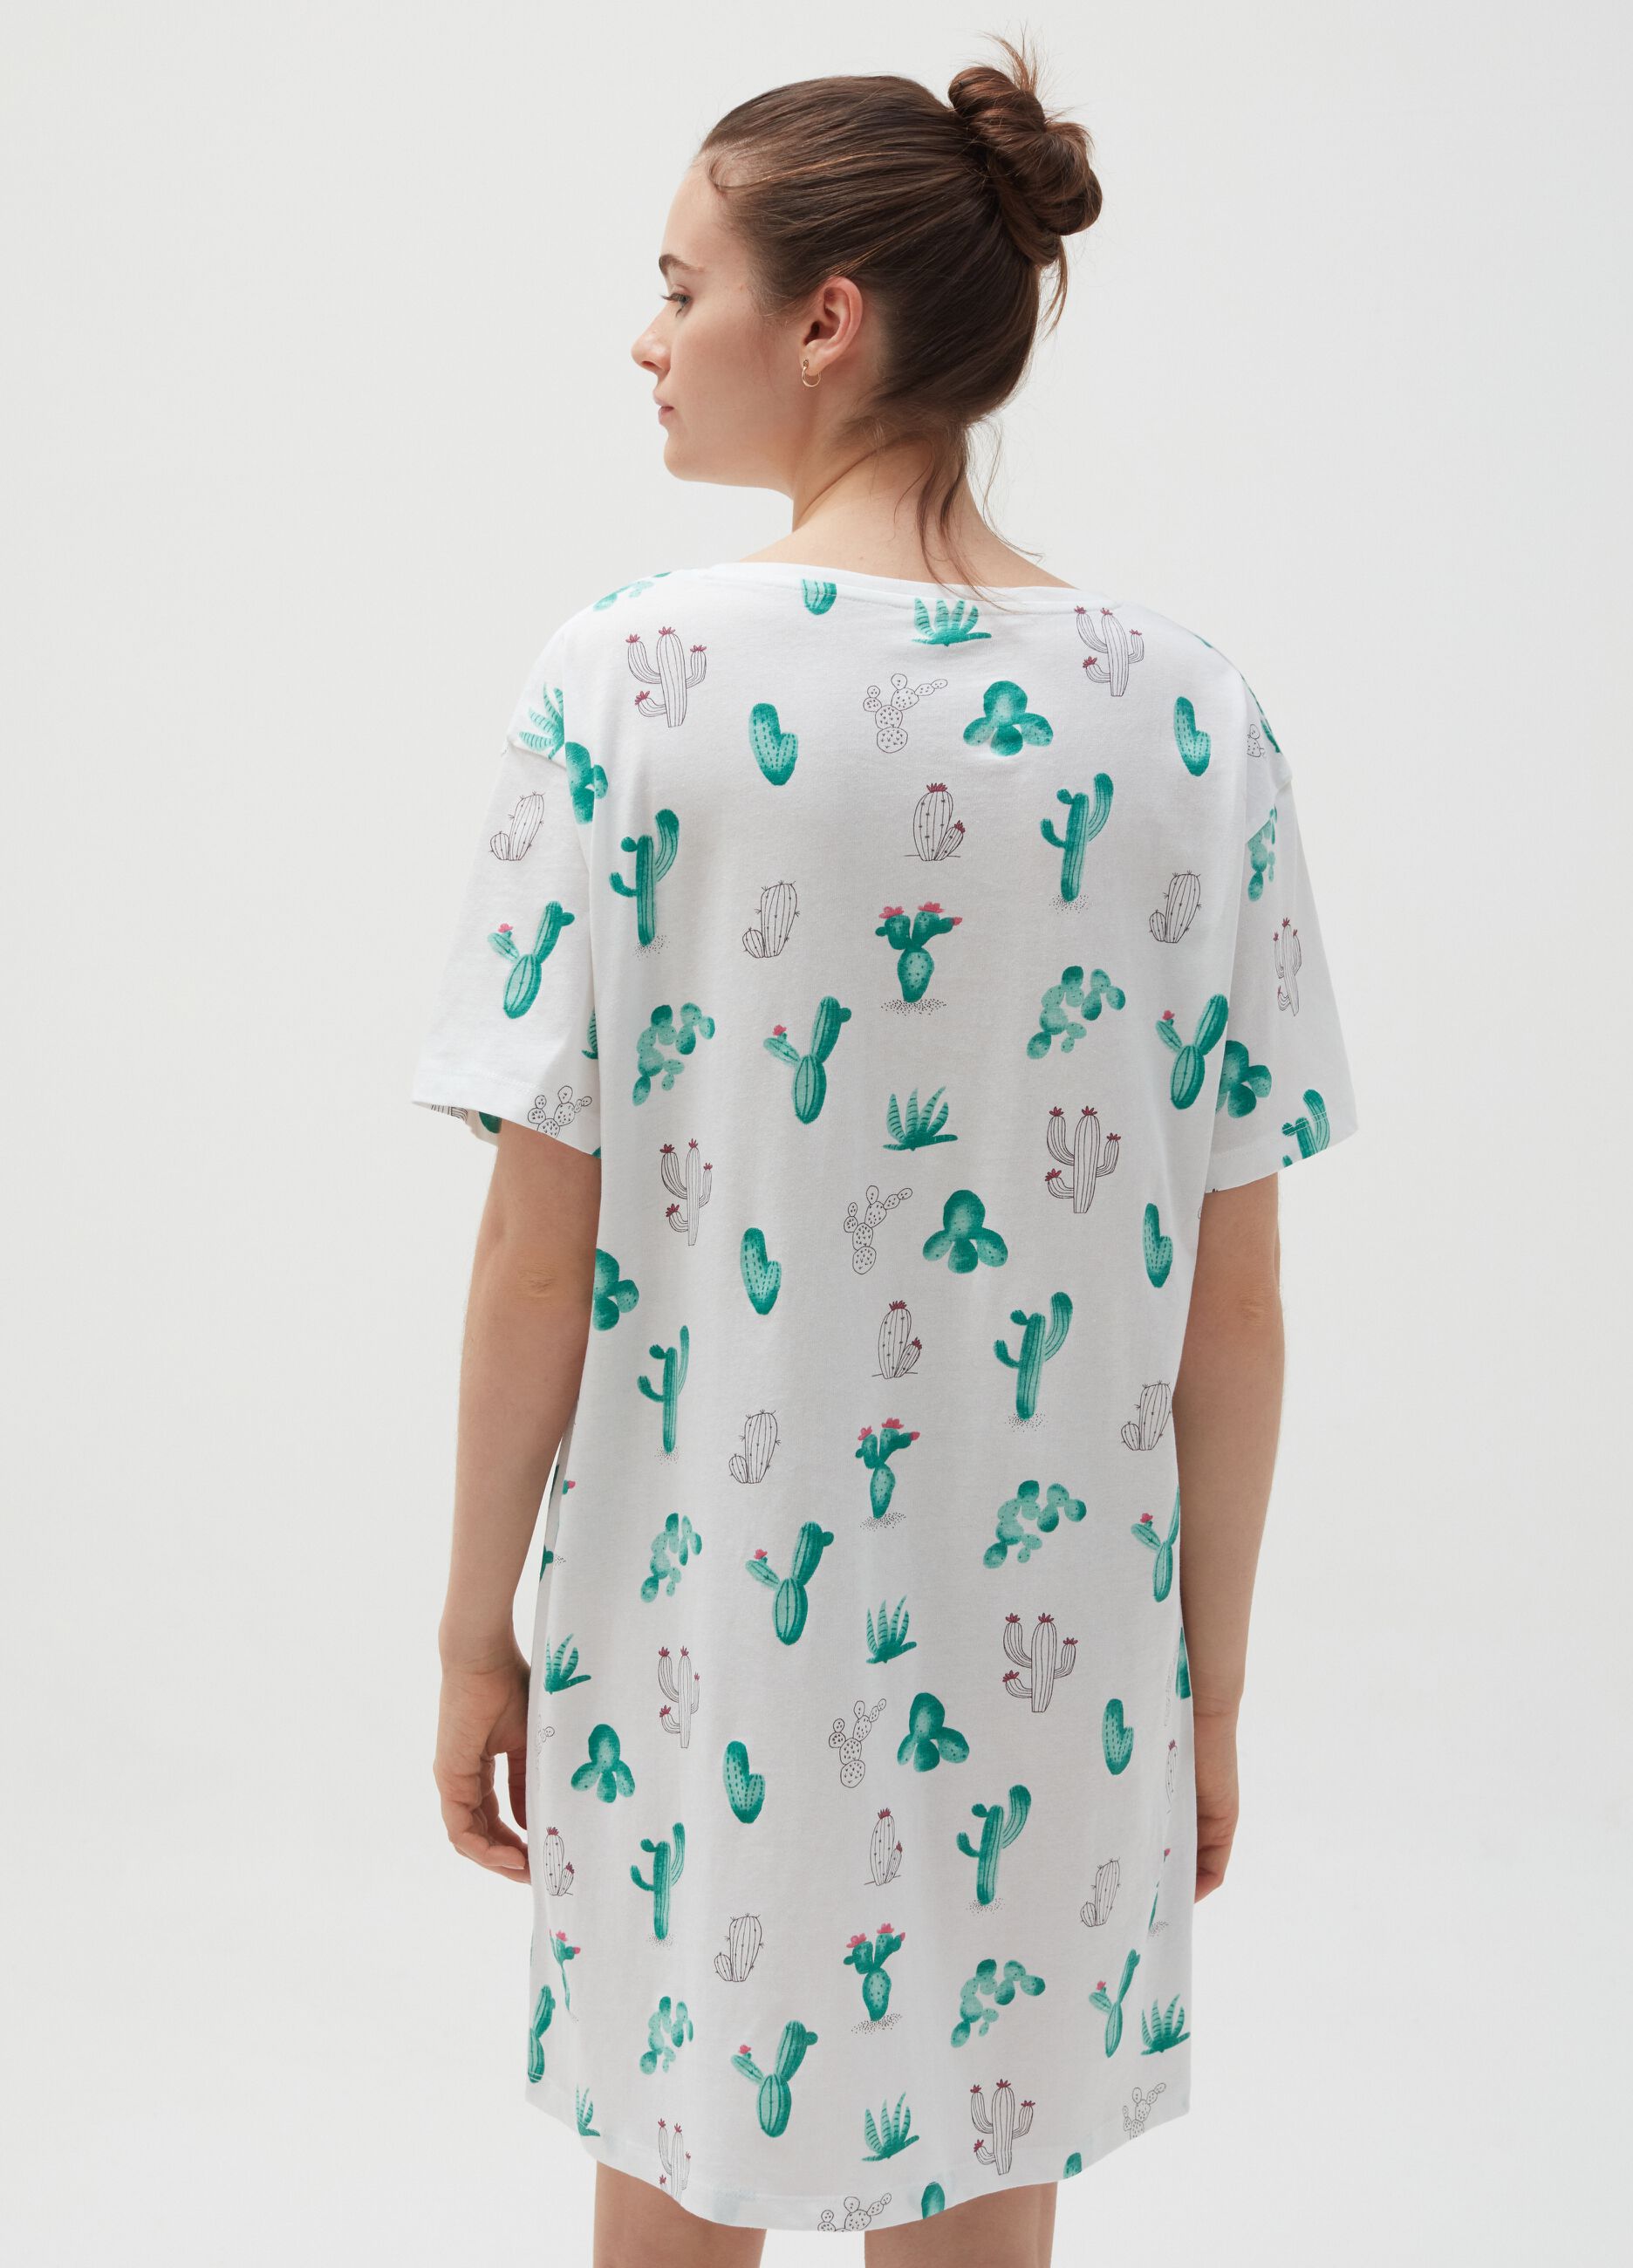 Cotton nightdress with cactus pattern